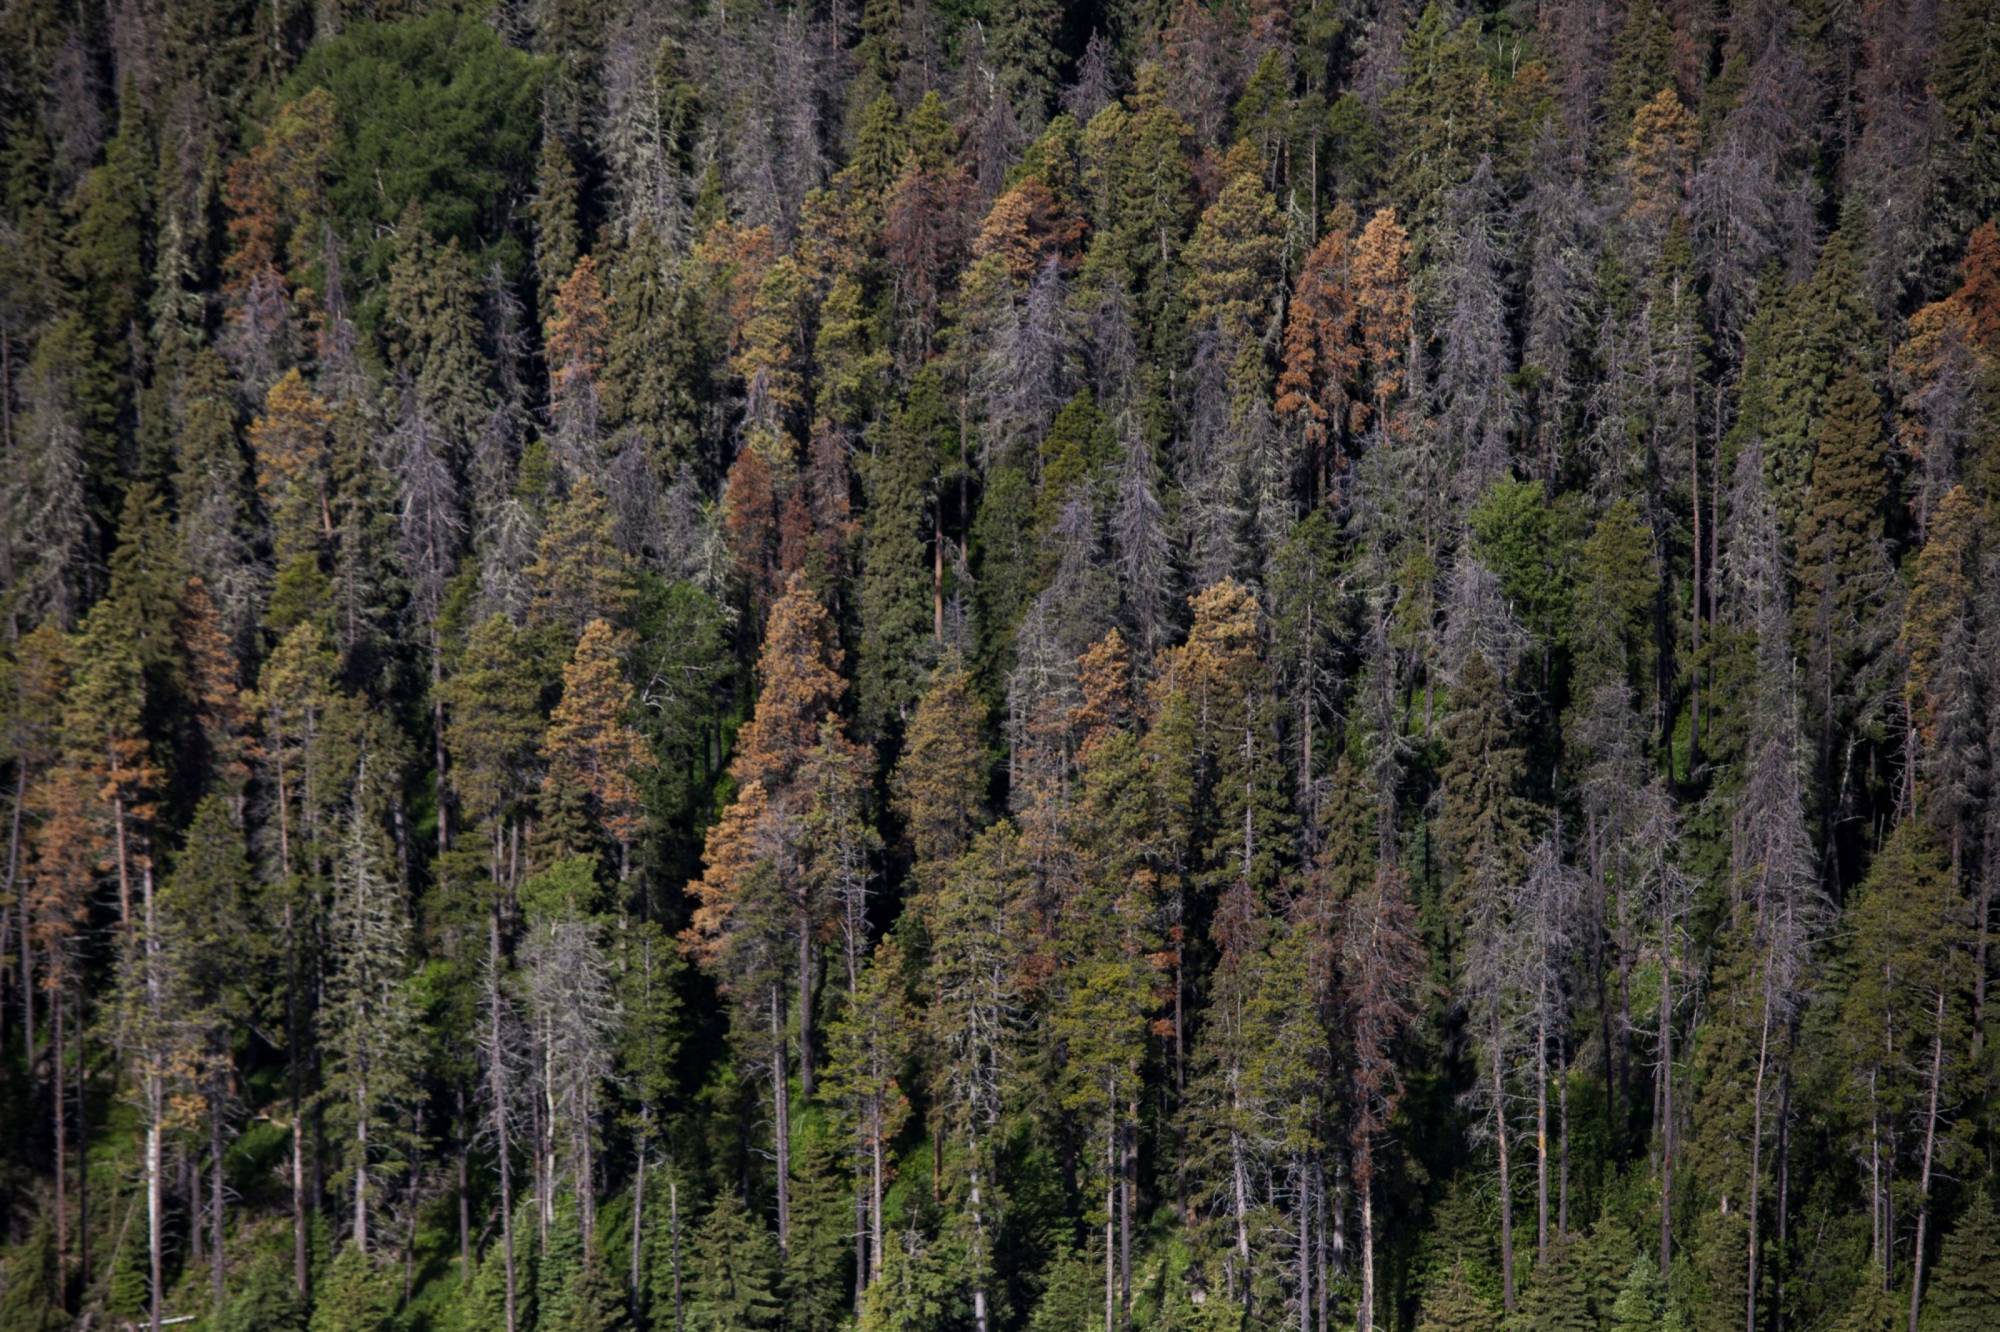 Dead and dying pine trees, infested by mountain pine beetles, stand in a forest near Whitecourt, Alberta, Canada, in 2015. | BLOOMBERG